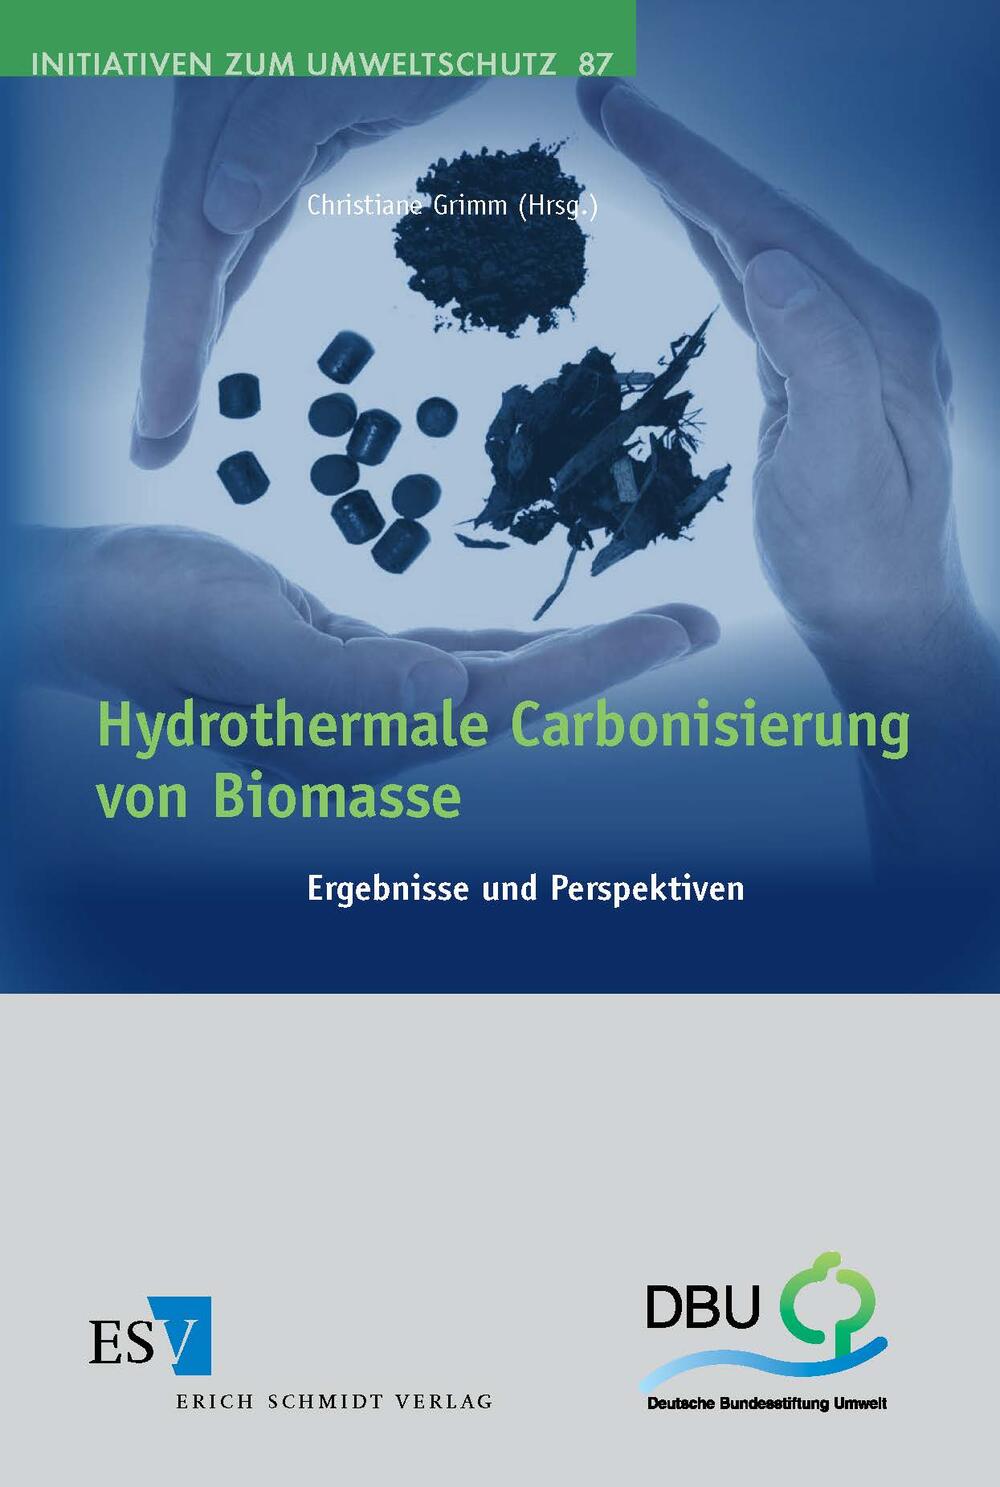 Hydrothermale Carbonisierung 